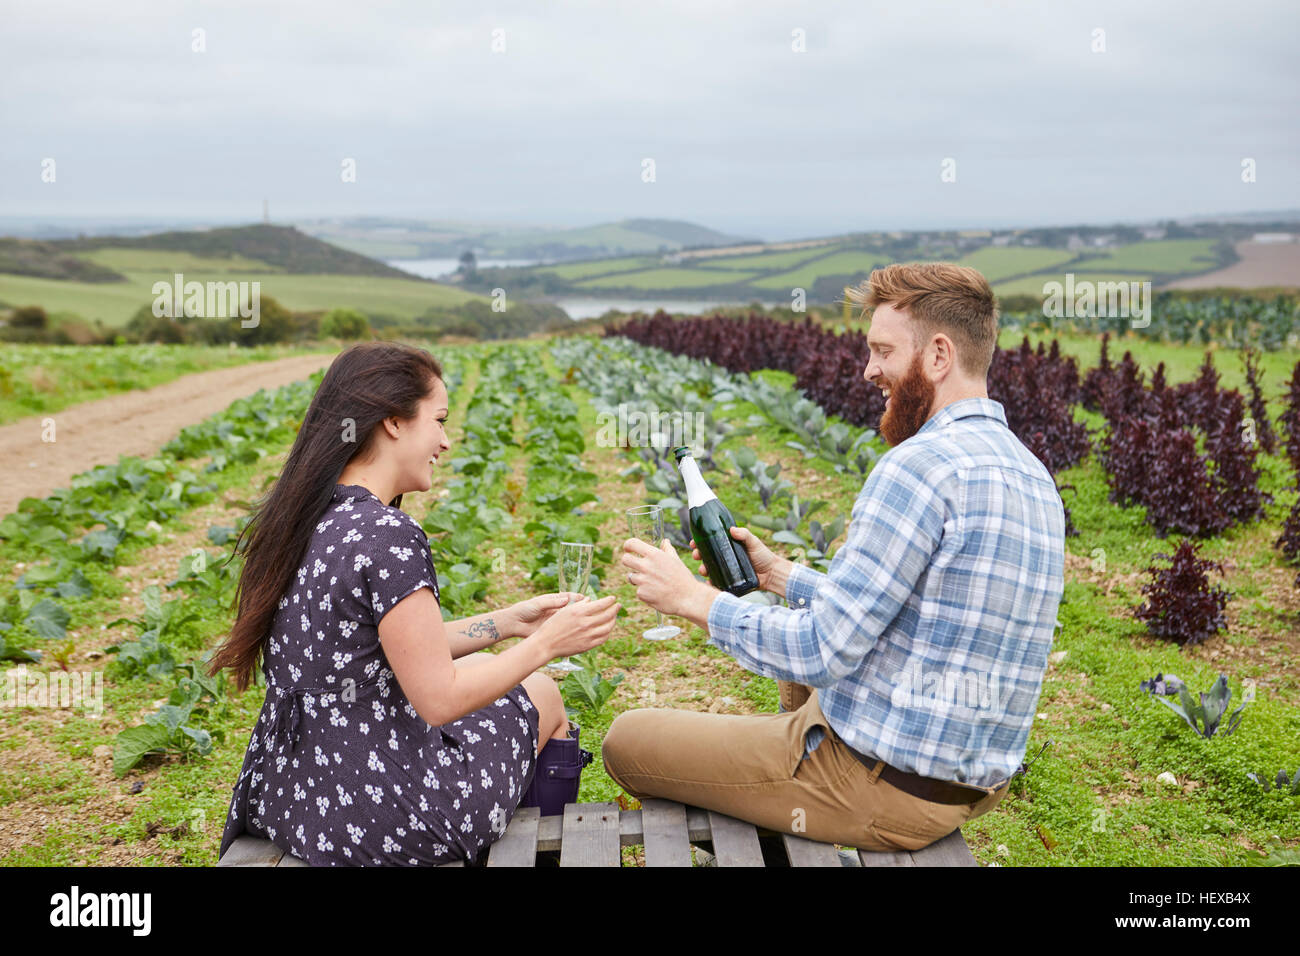 Couple in rural location sitting on pallets pouring champagne Stock Photo